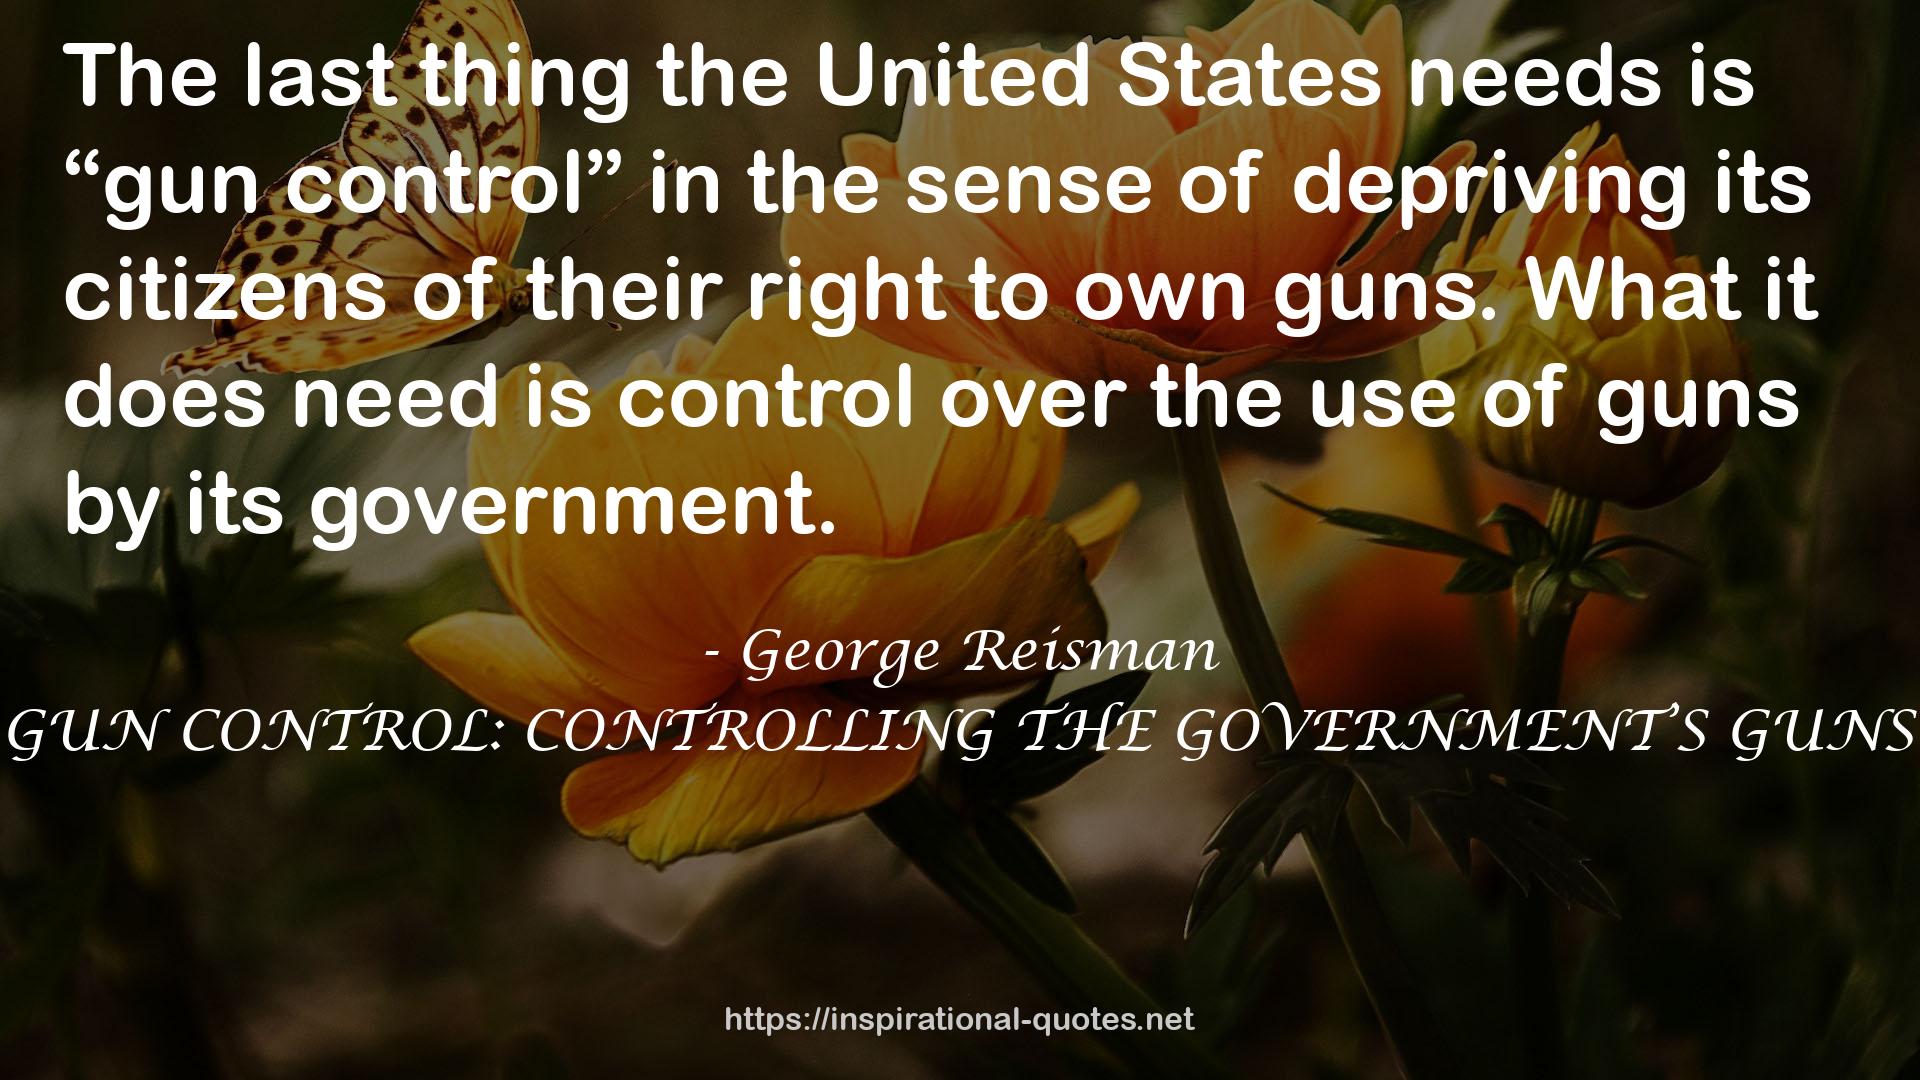 GUN CONTROL: CONTROLLING THE GOVERNMENT’S GUNS QUOTES